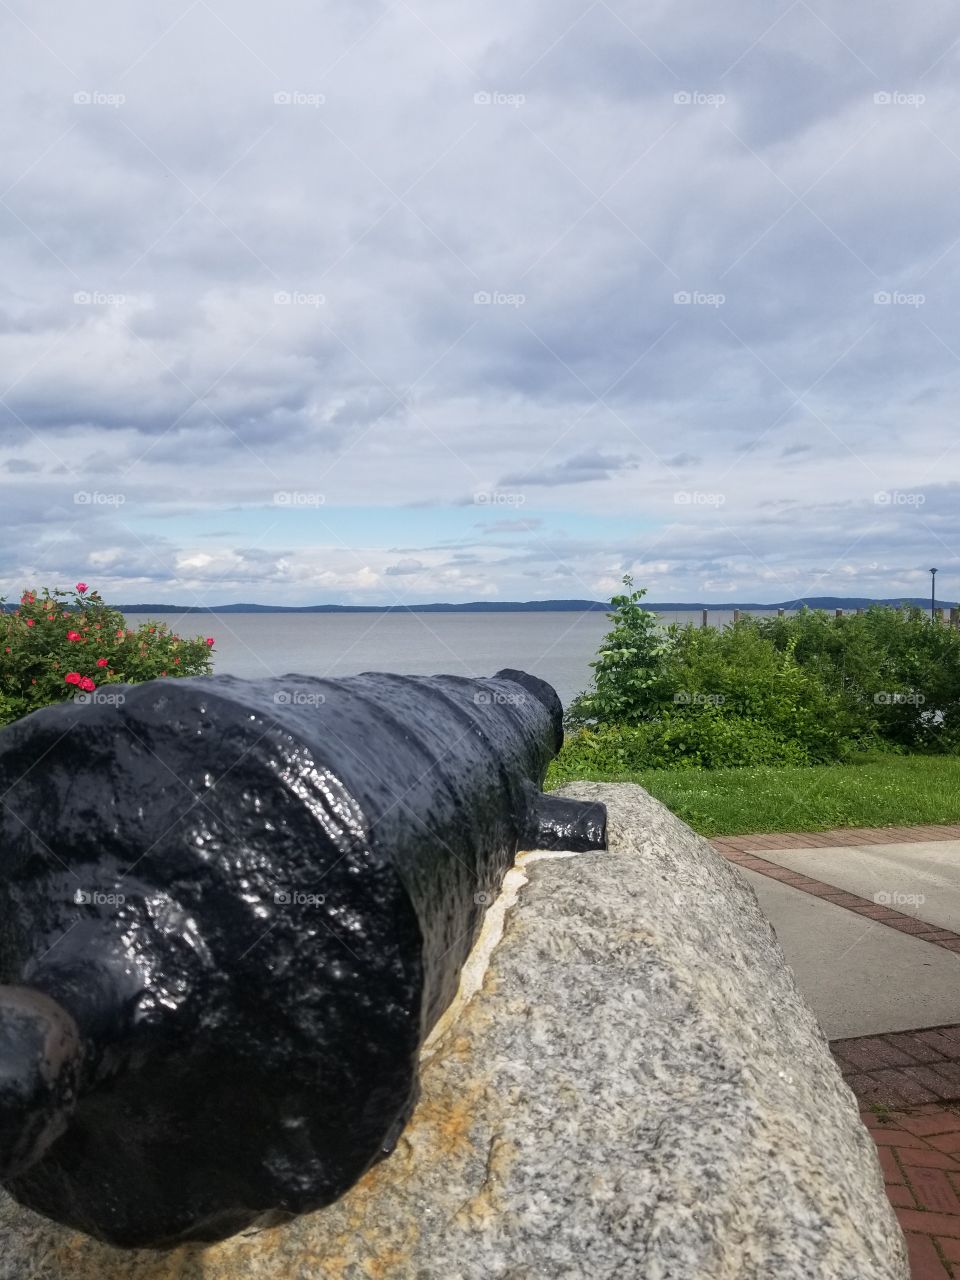 cannon used in the war of 1812